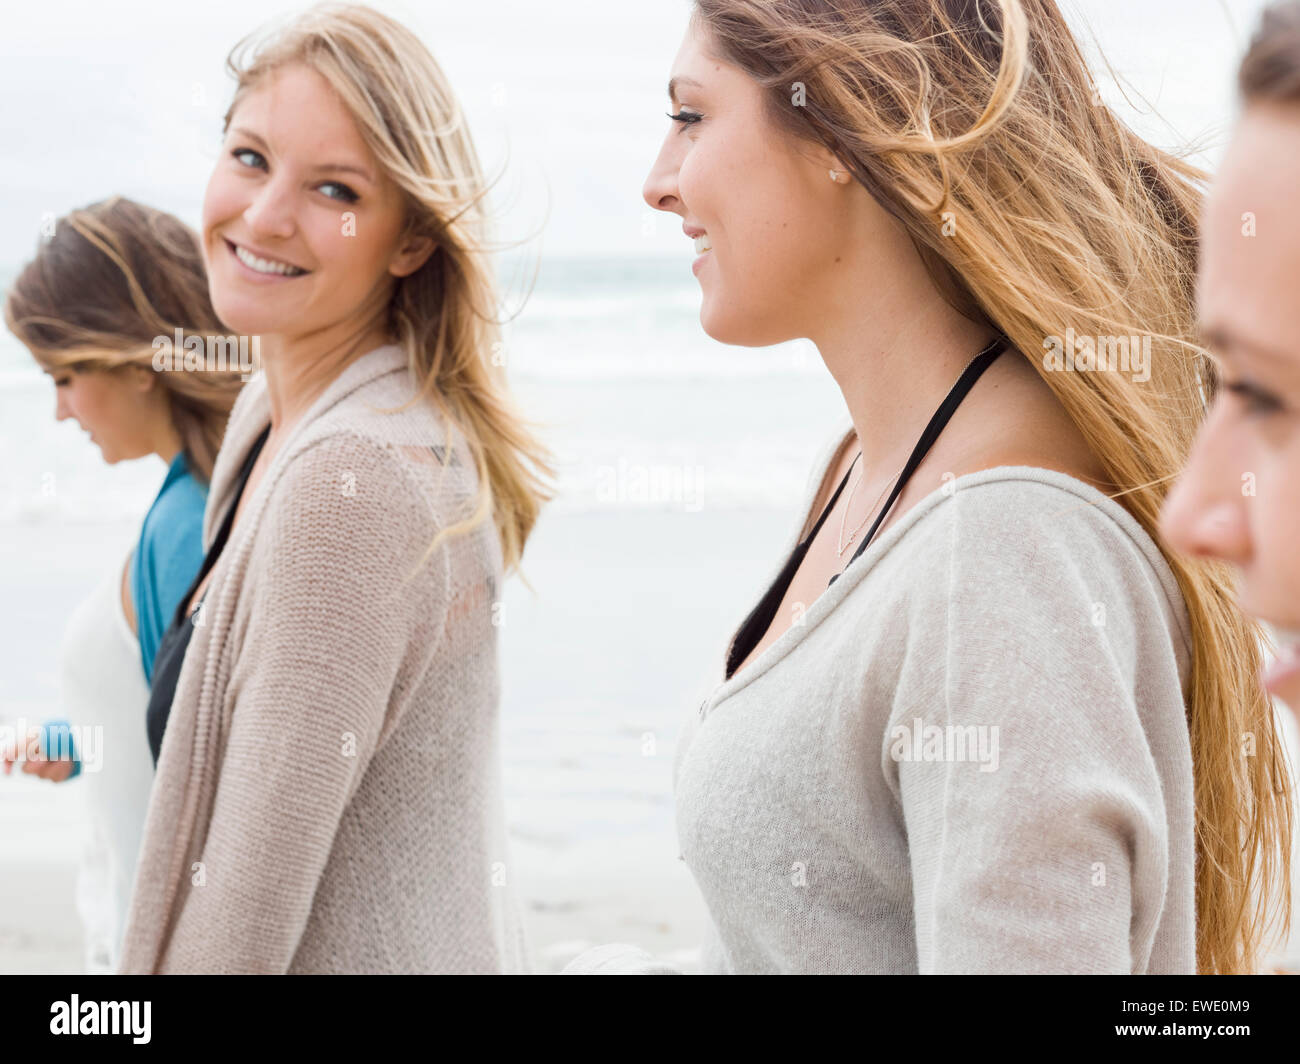 A group of smiling young women walking on a beach Stock Photo